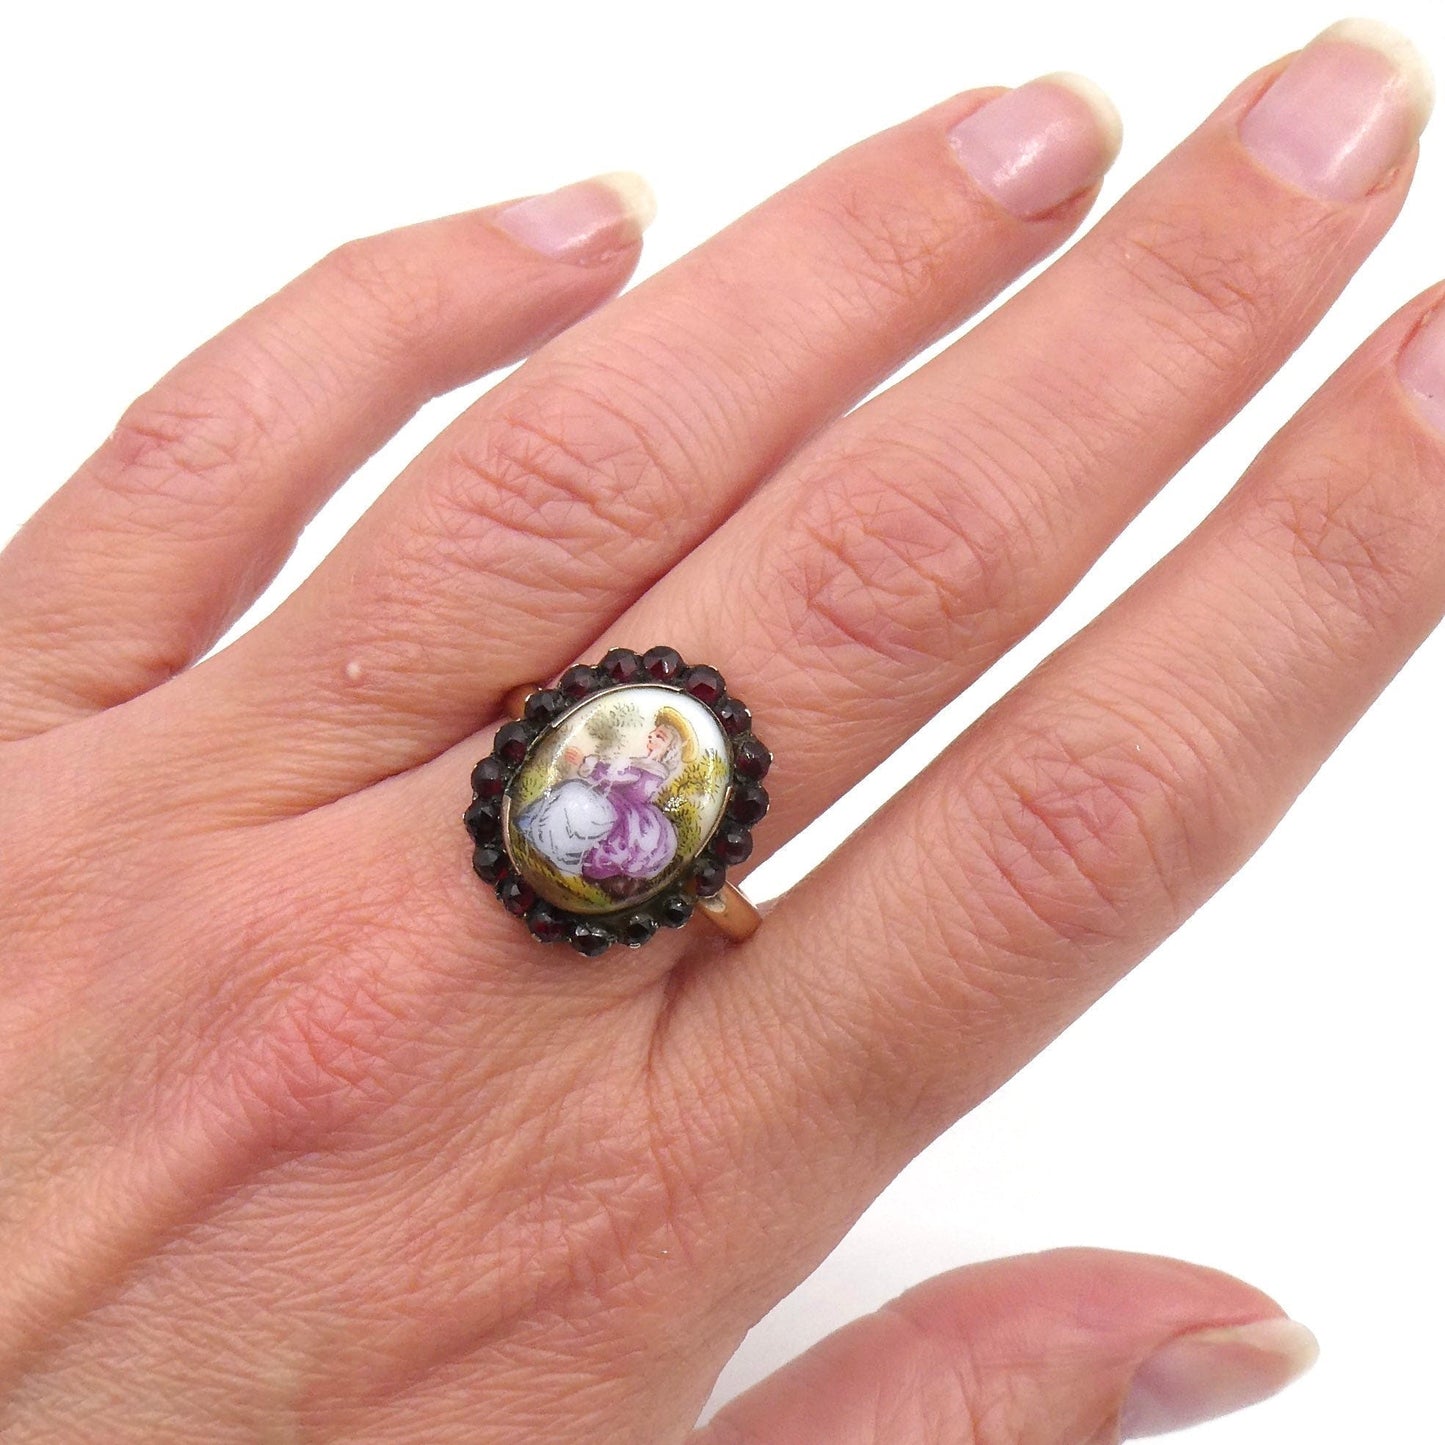 Georgian hand painted gold ring, porcelain ring painted with a lady surrounded by a border of garnets. - Collected